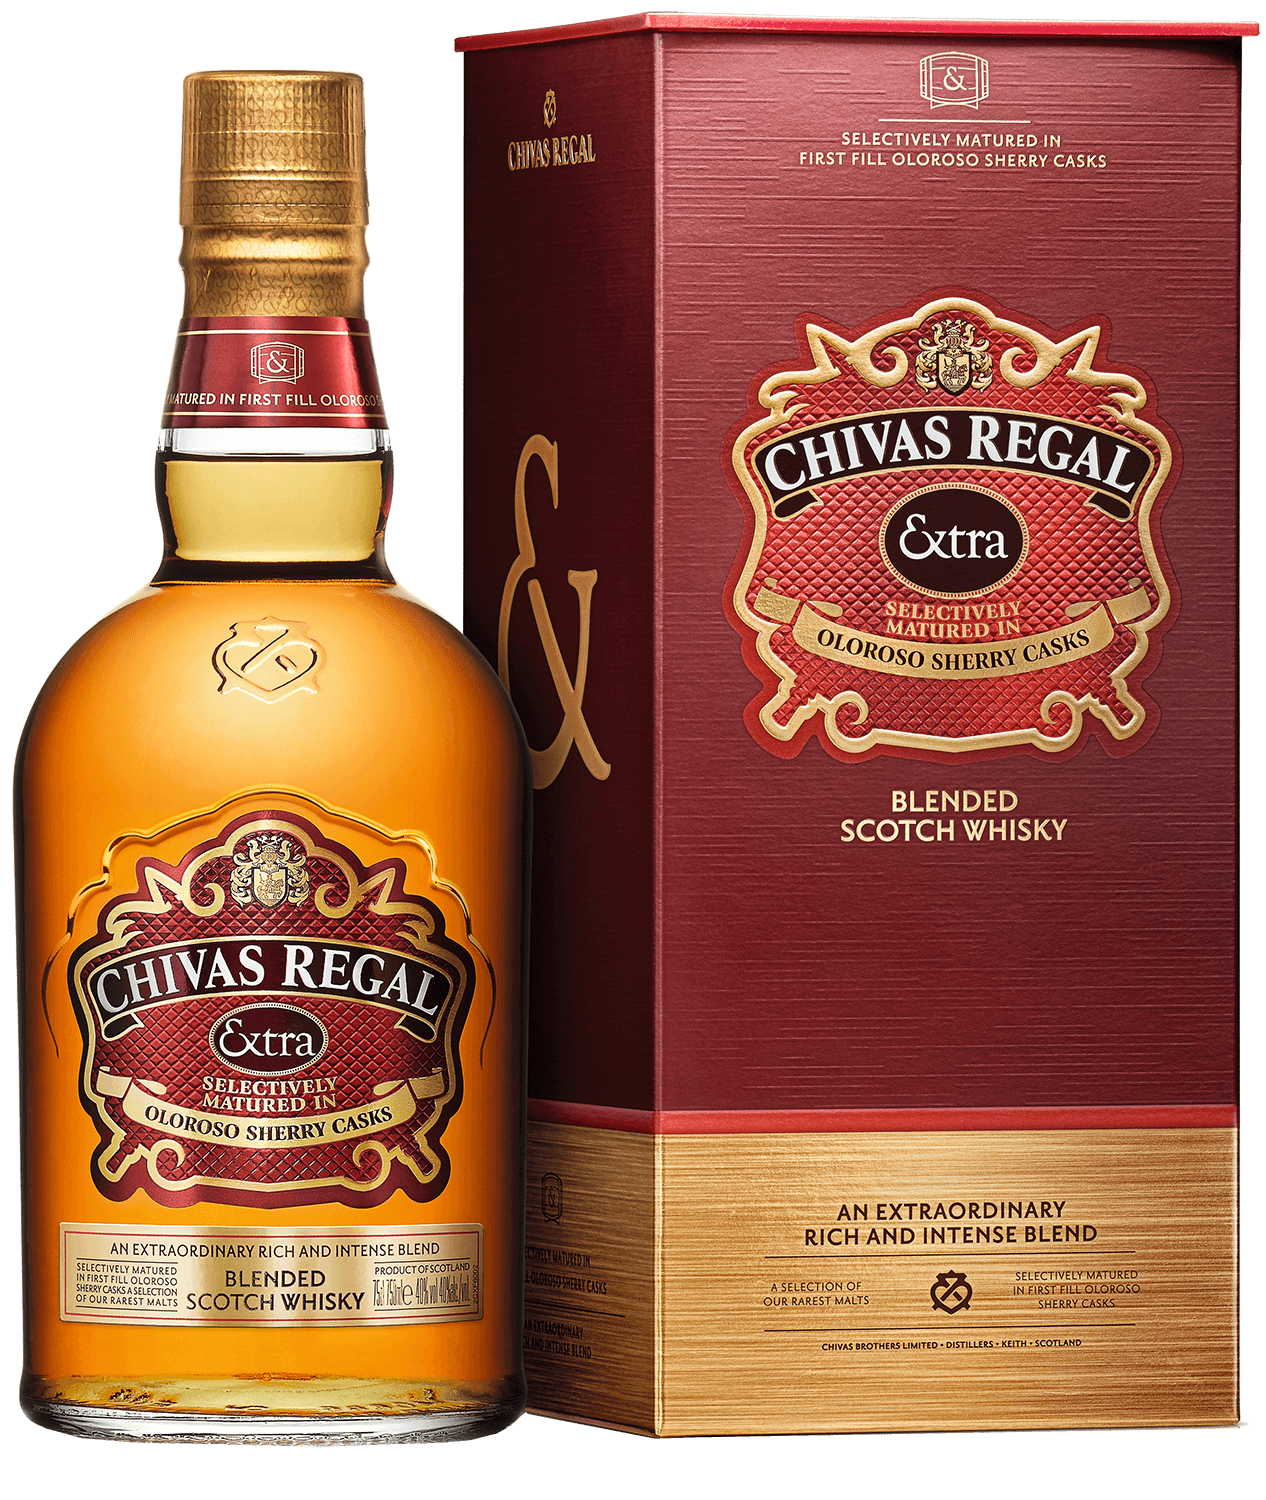 Chivas Regal Extra Blended Scotch Whisky (gift box) chivas regal blended scotch whisky 12 y o gift box